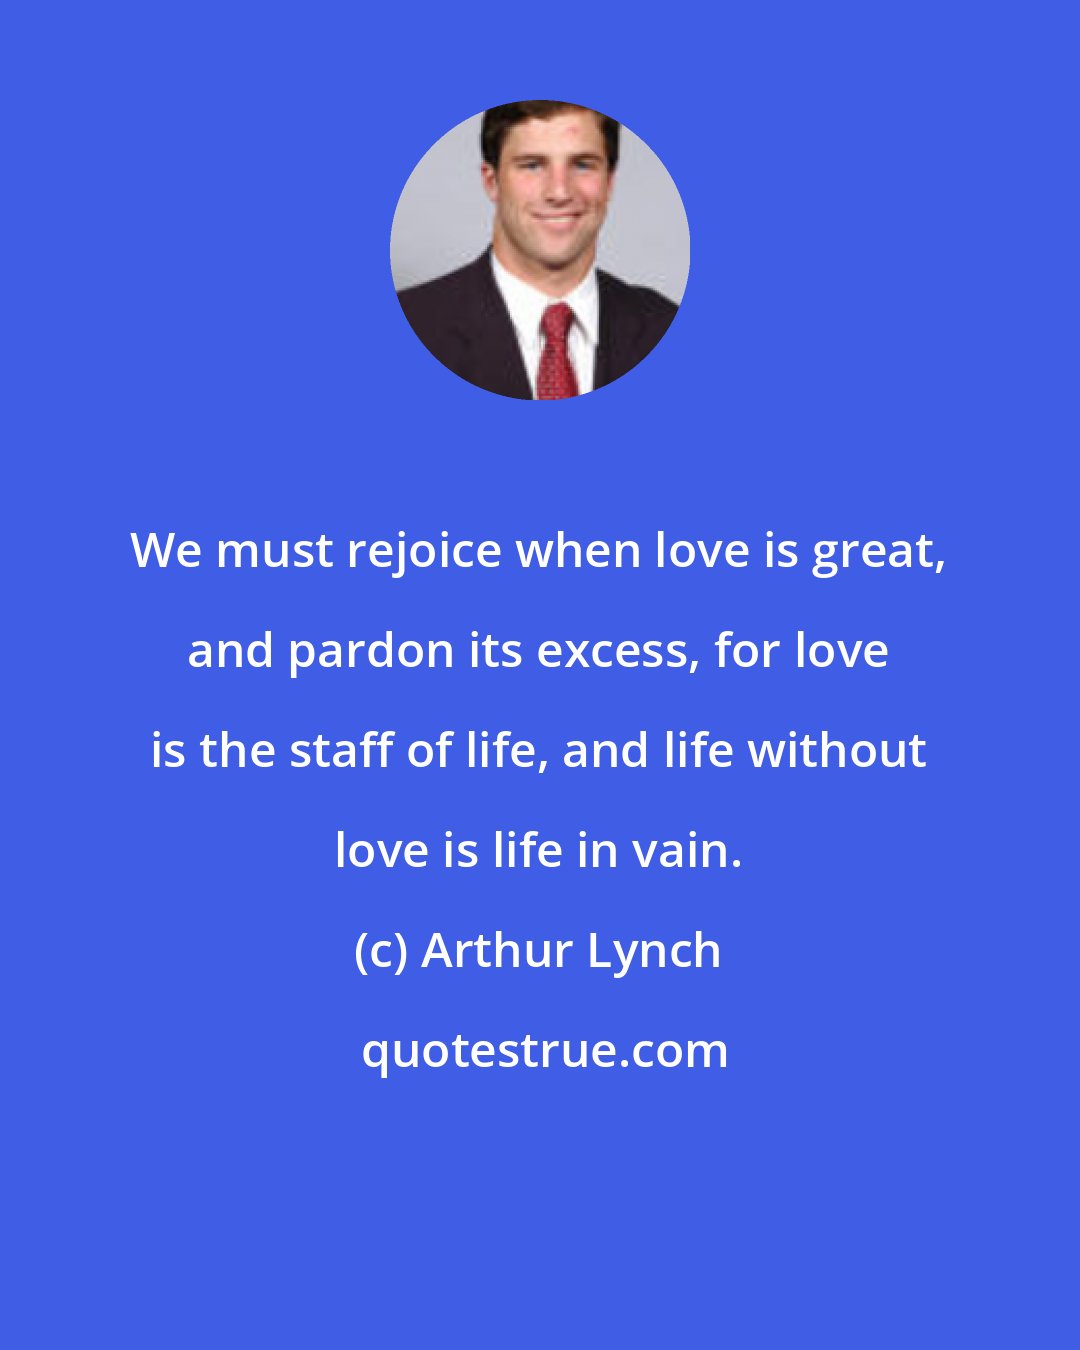 Arthur Lynch: We must rejoice when love is great, and pardon its excess, for love is the staff of life, and life without love is life in vain.